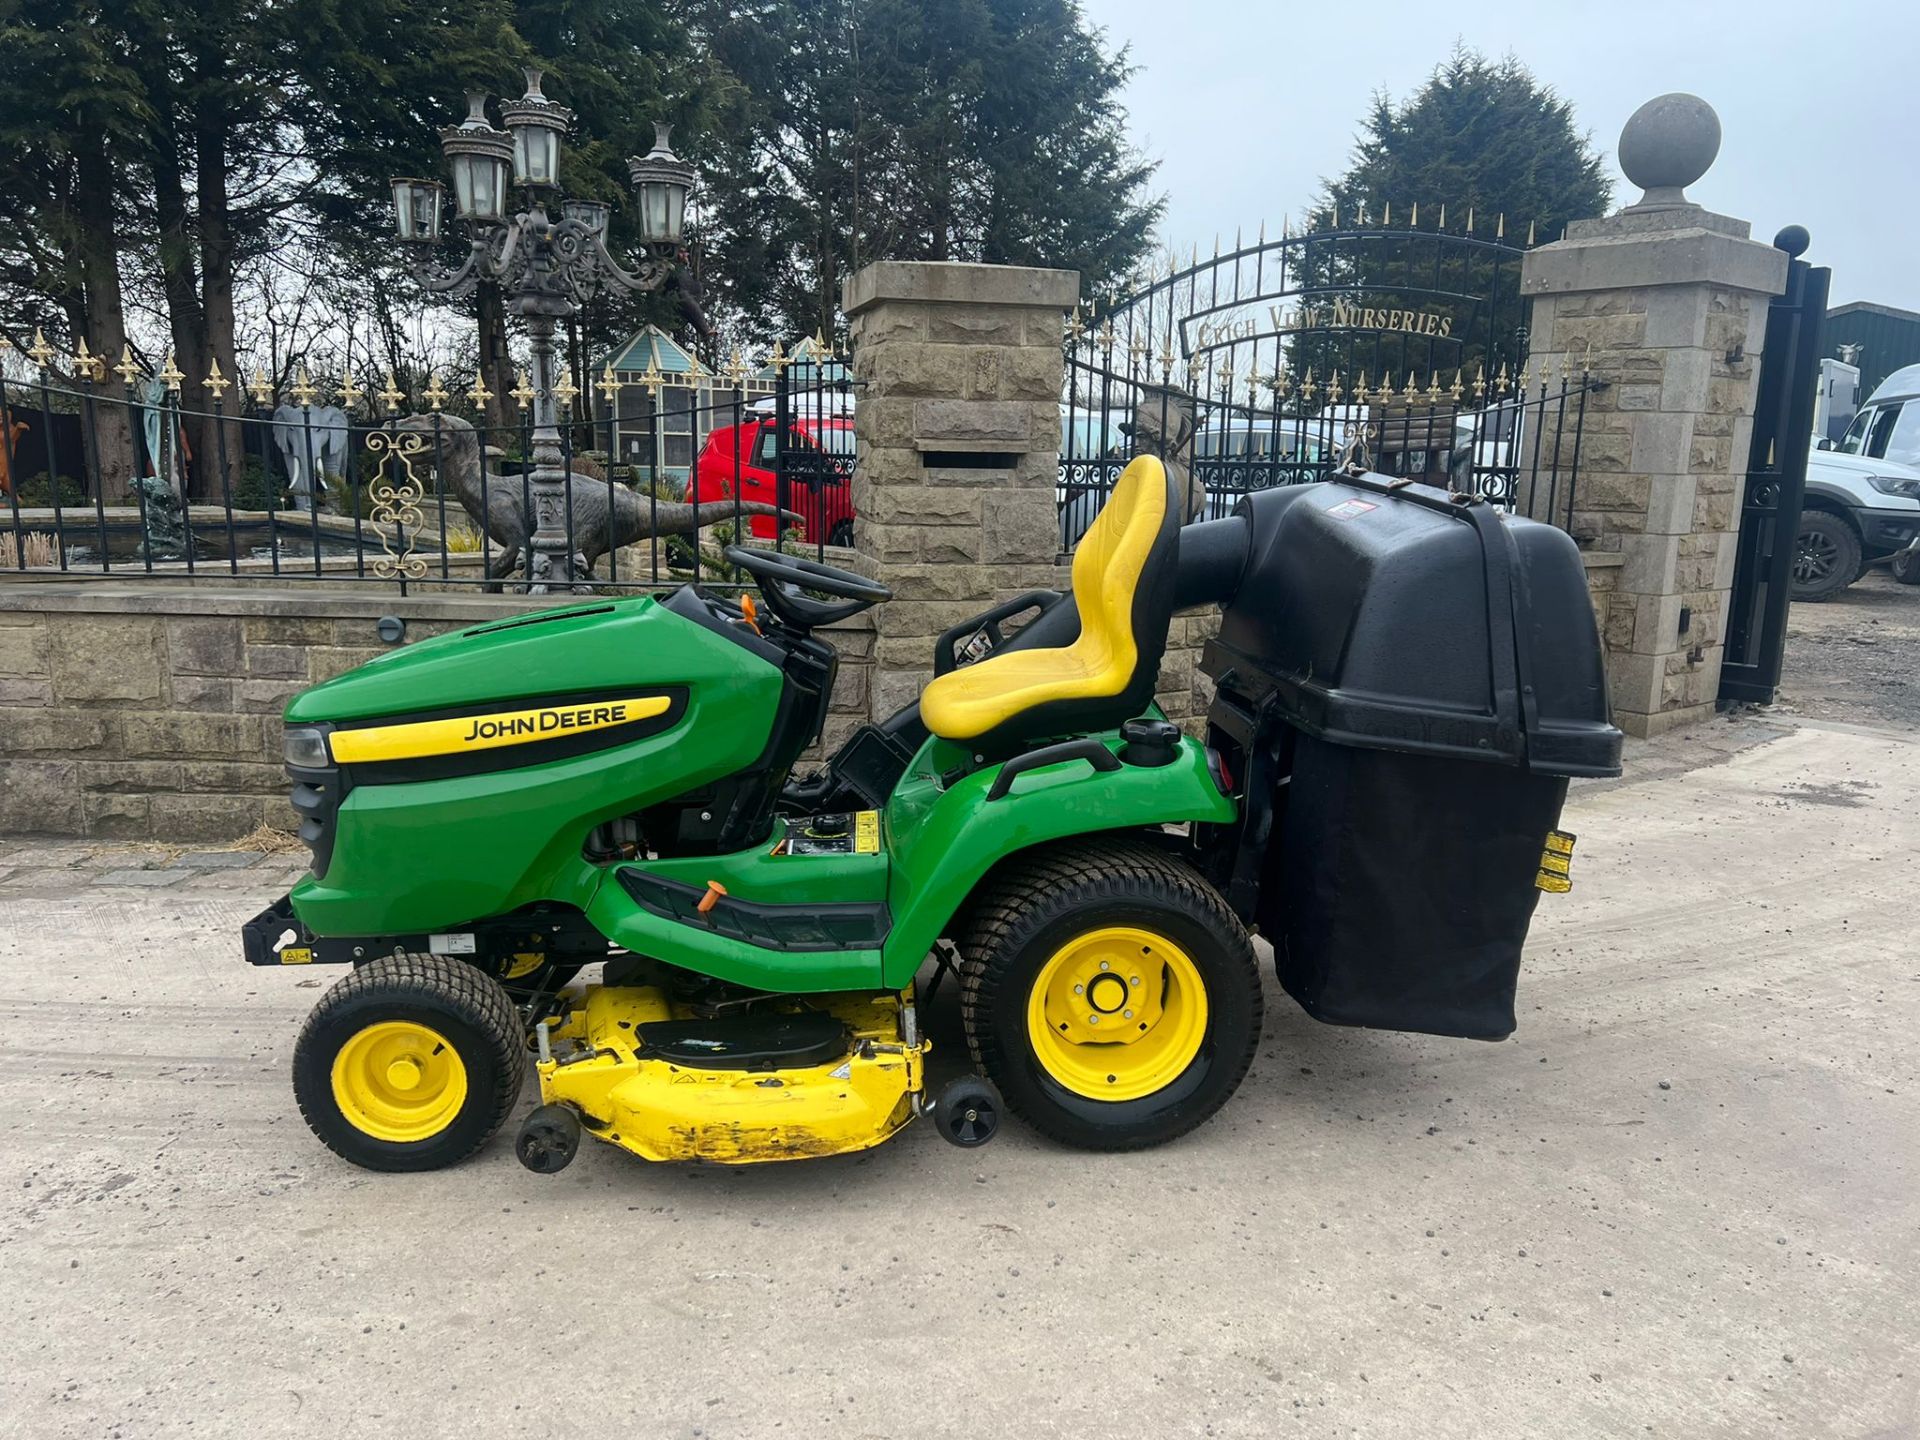 JOHN DEERE X540 RIDE ON LAWN MOWER, HYDRAULIC UP AND DOWN DECK, YEAR 2012 *PLUS VAT* - Image 3 of 9